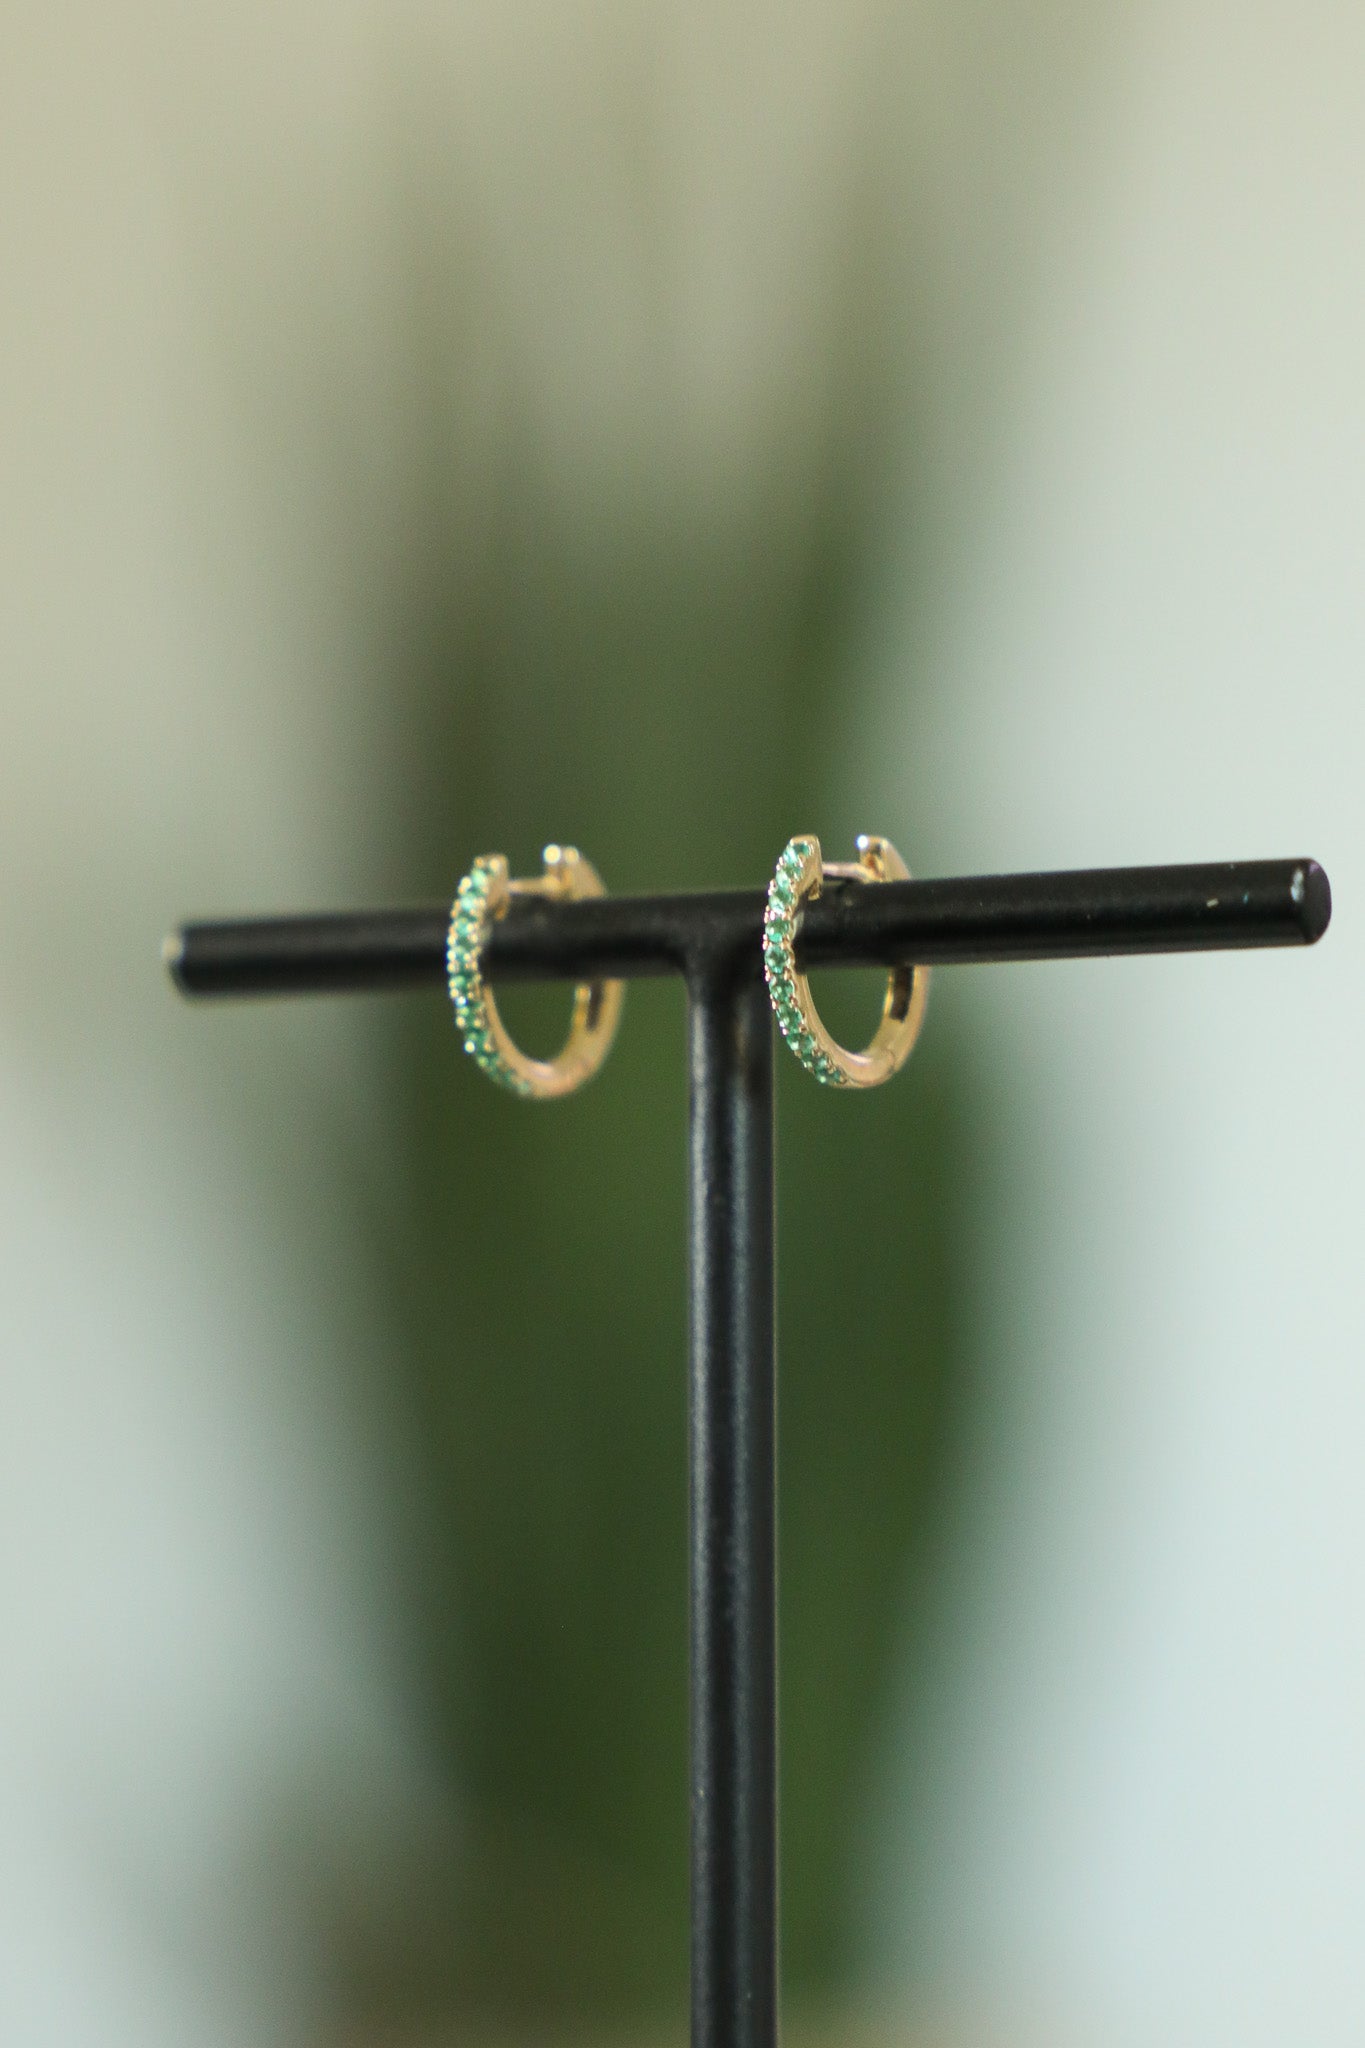 E171 - 14k YG 12mm Hoops w/20 Round Emeralds 0.15cts